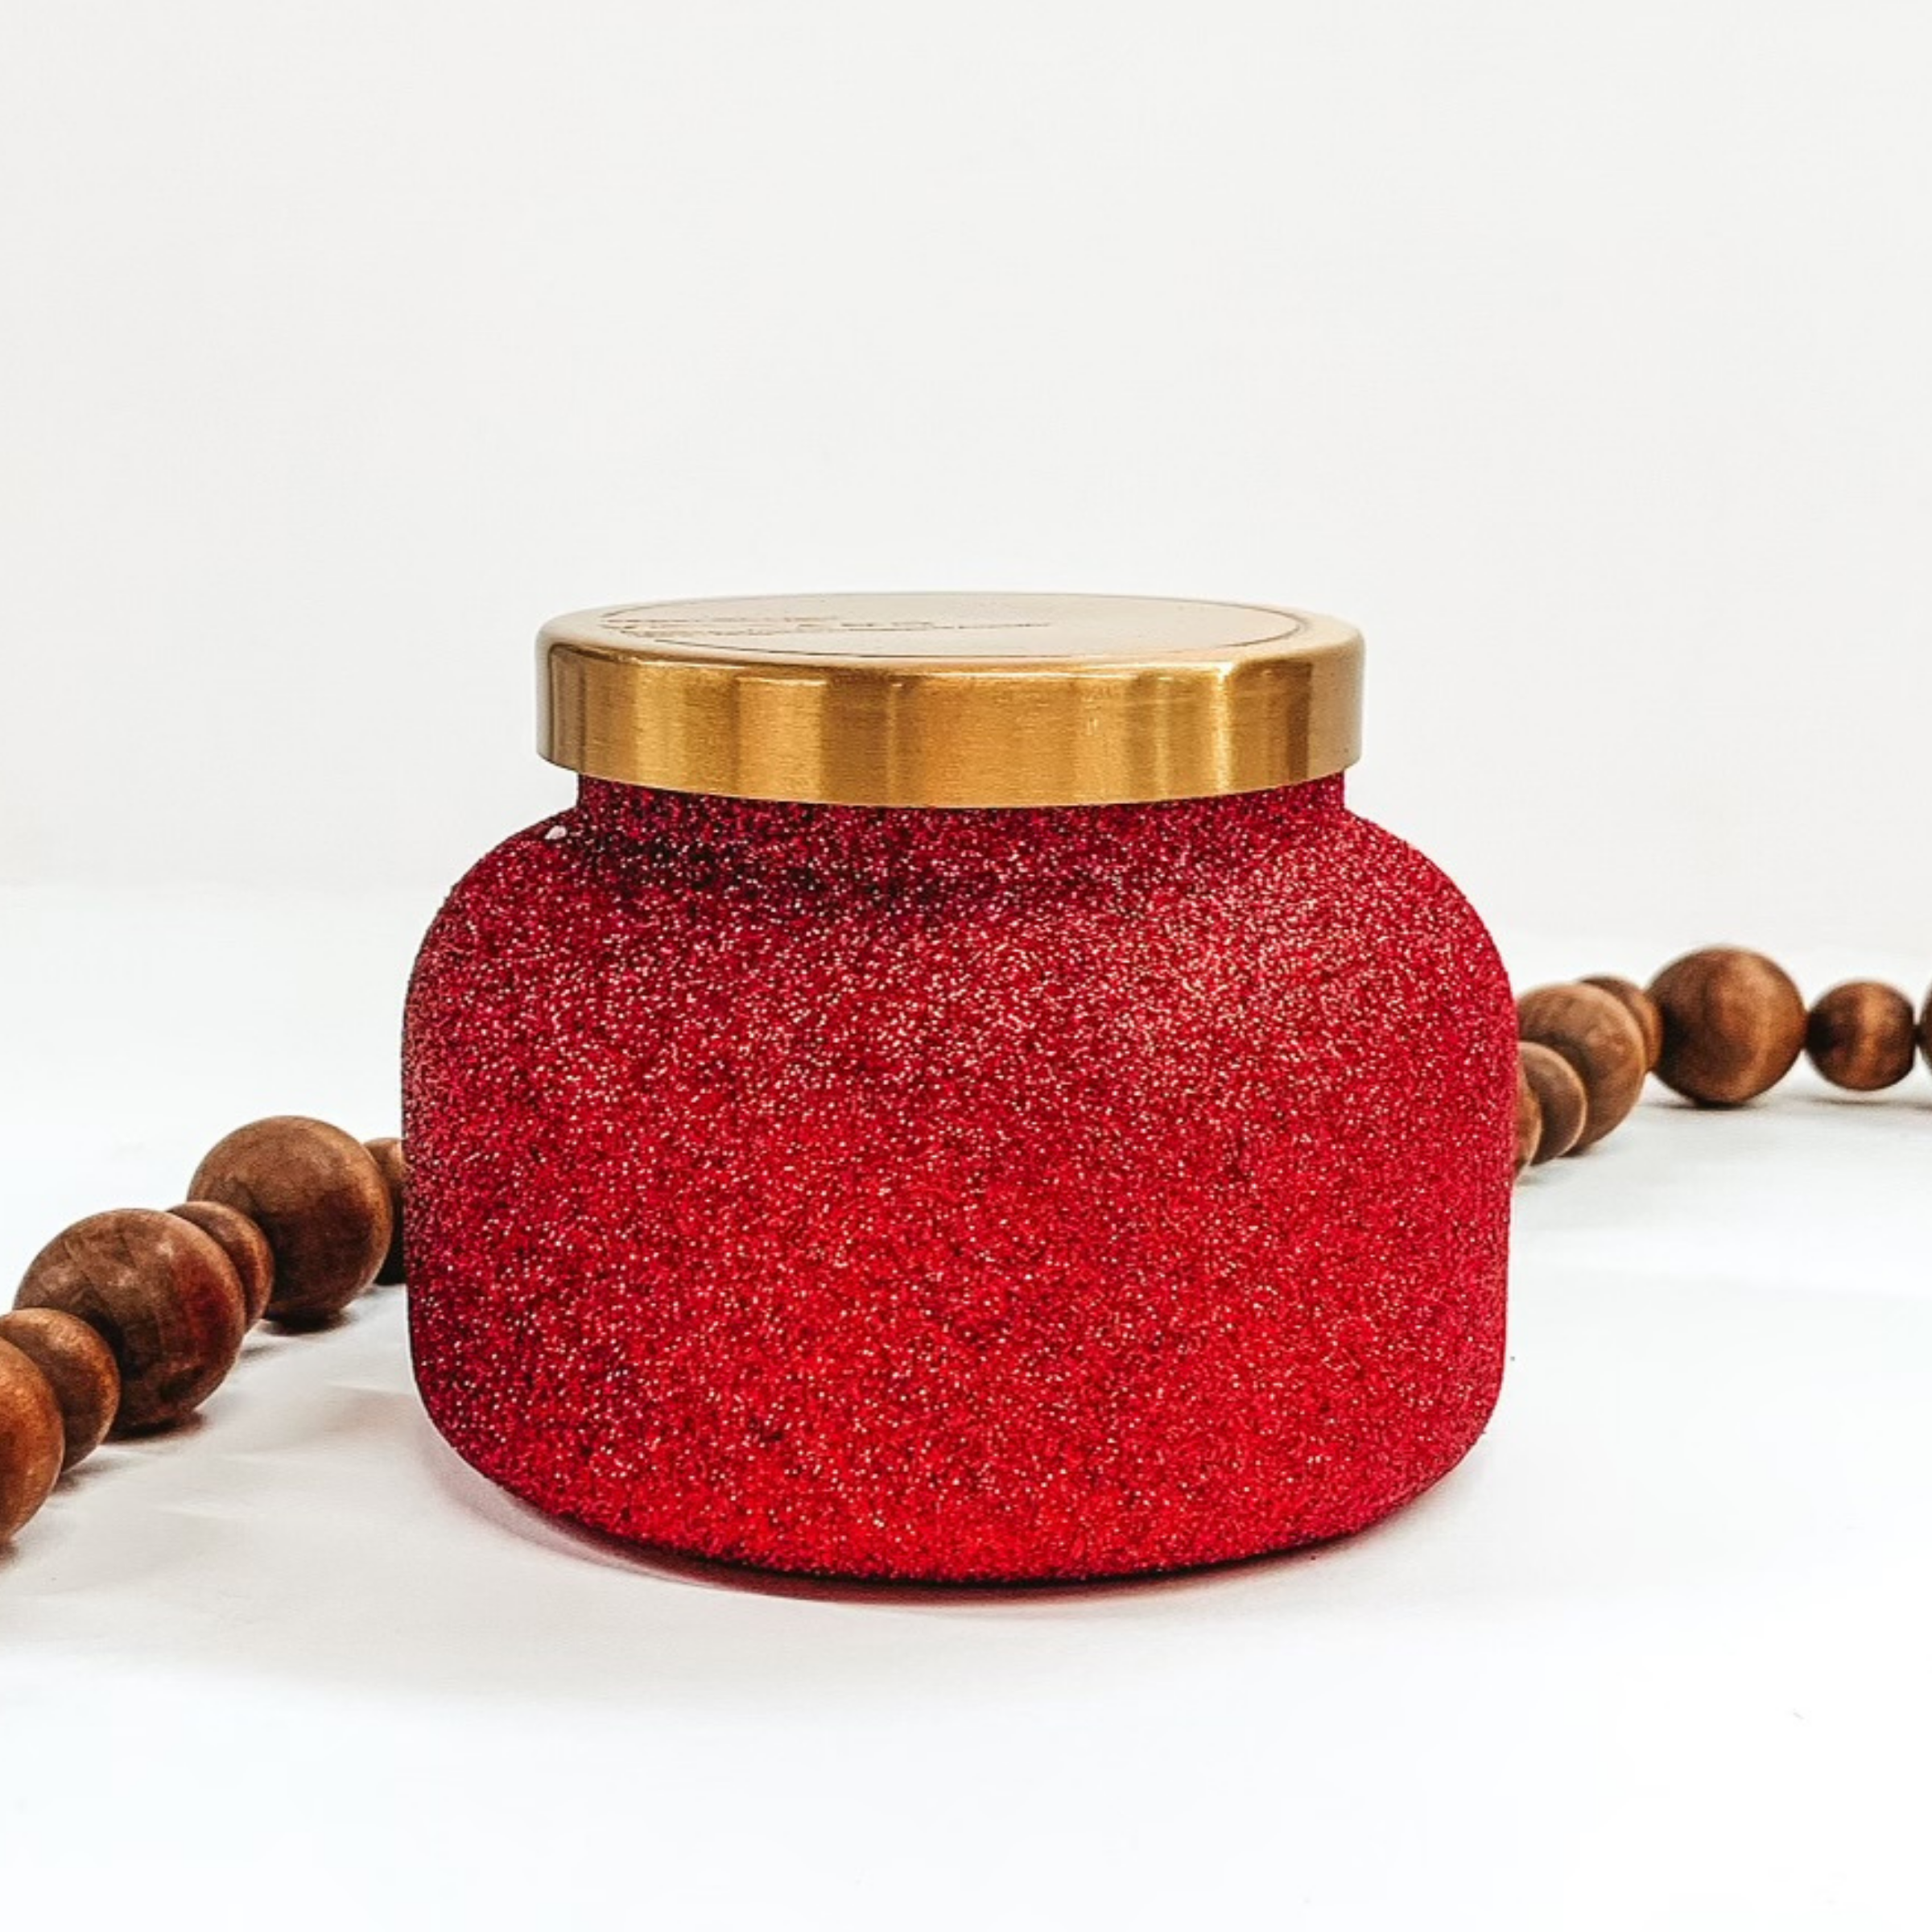 Capri Blue | 19 oz. Jar Candle in Red Glitter | Volcano - Giddy Up Glamour Boutique